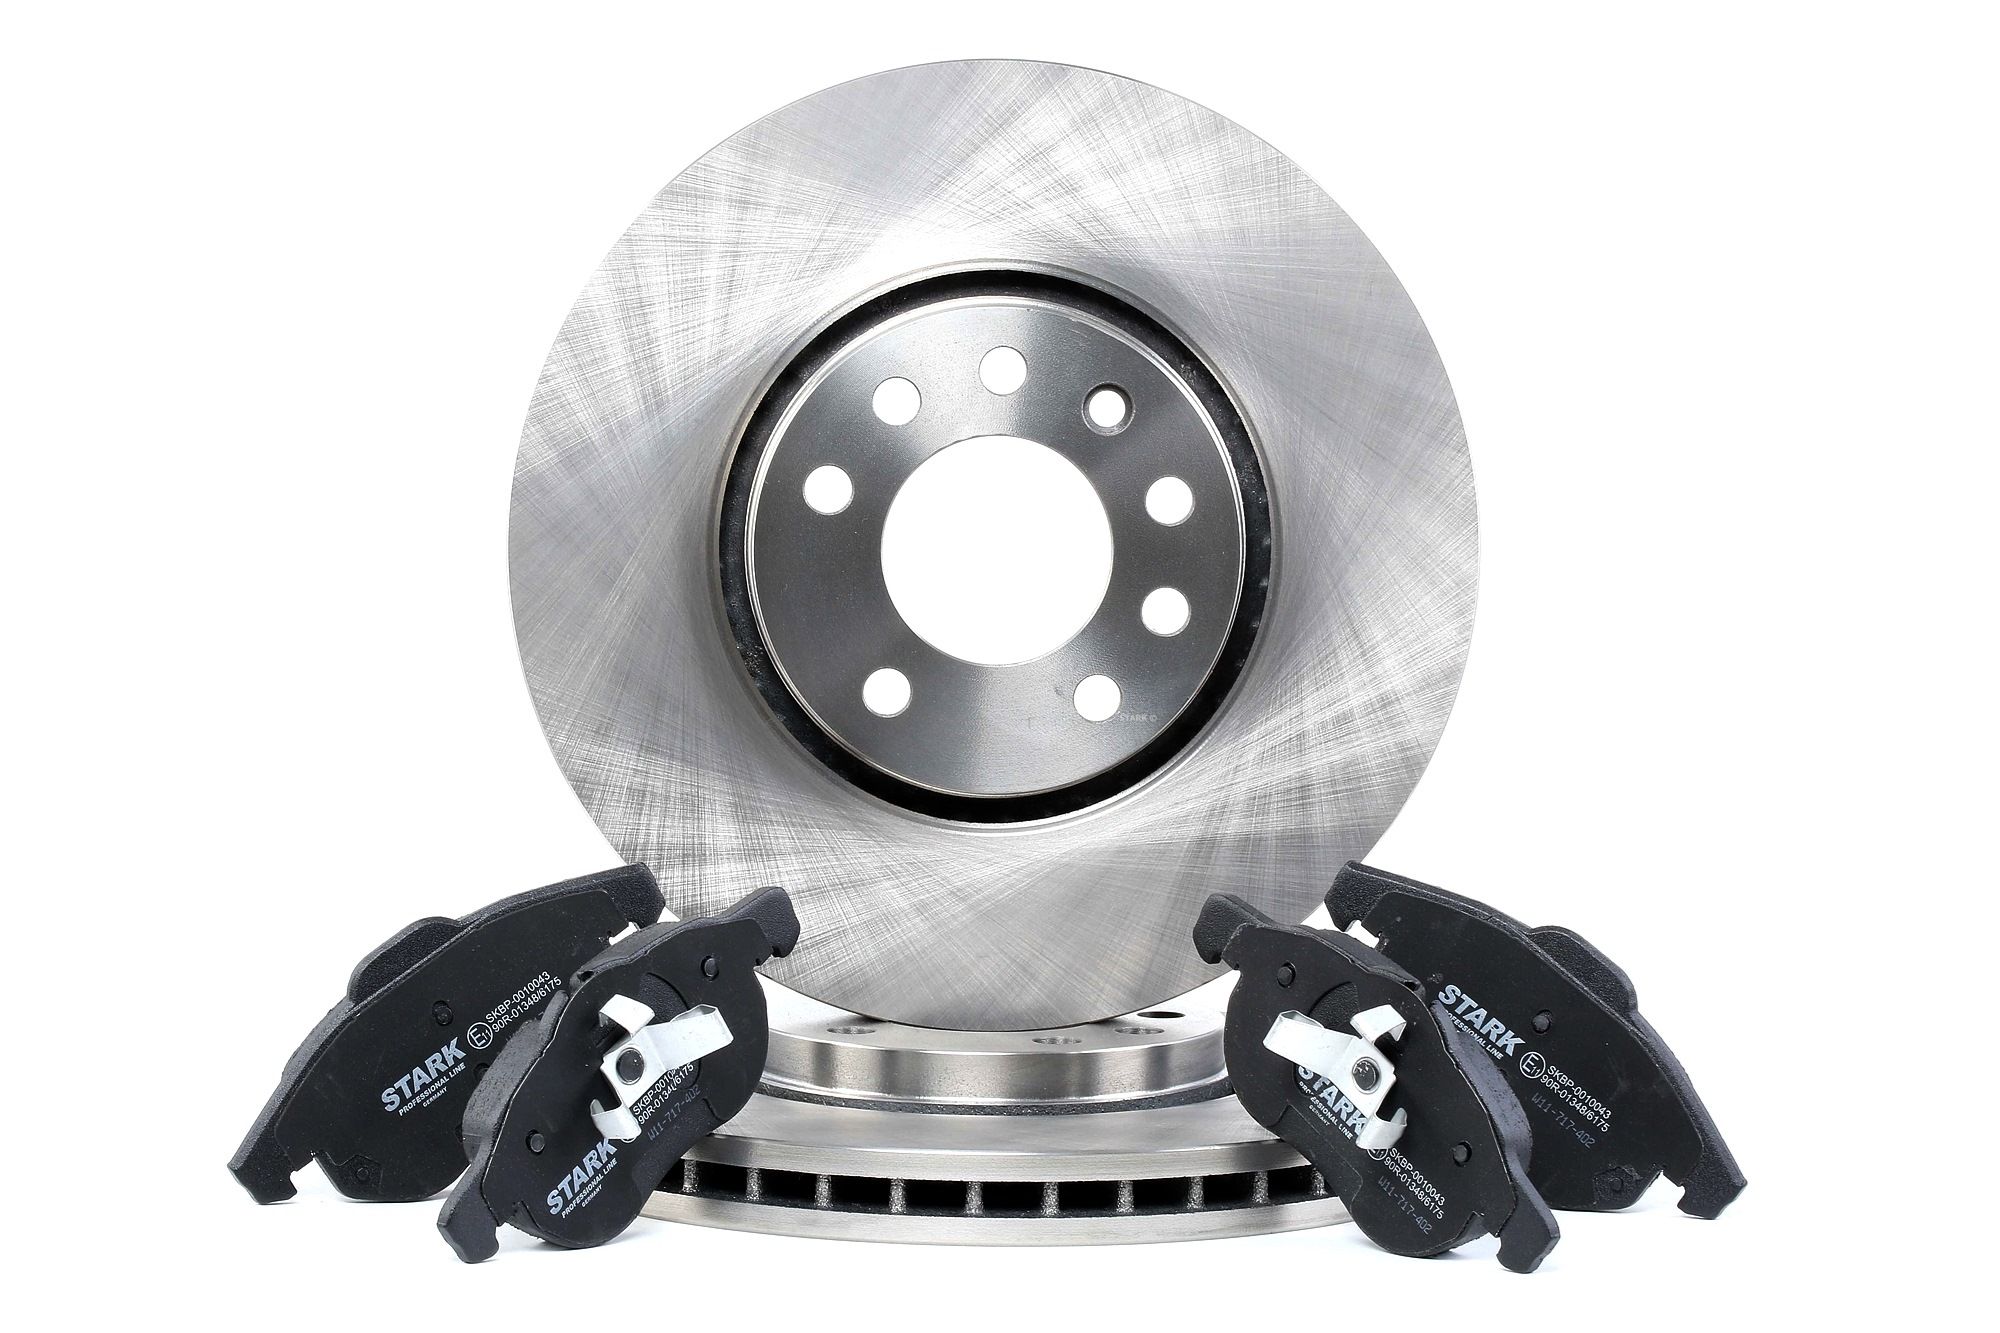 STARK SKBK-1090252 Brake discs and pads set Front Axle, Vented, excl. wear warning contact